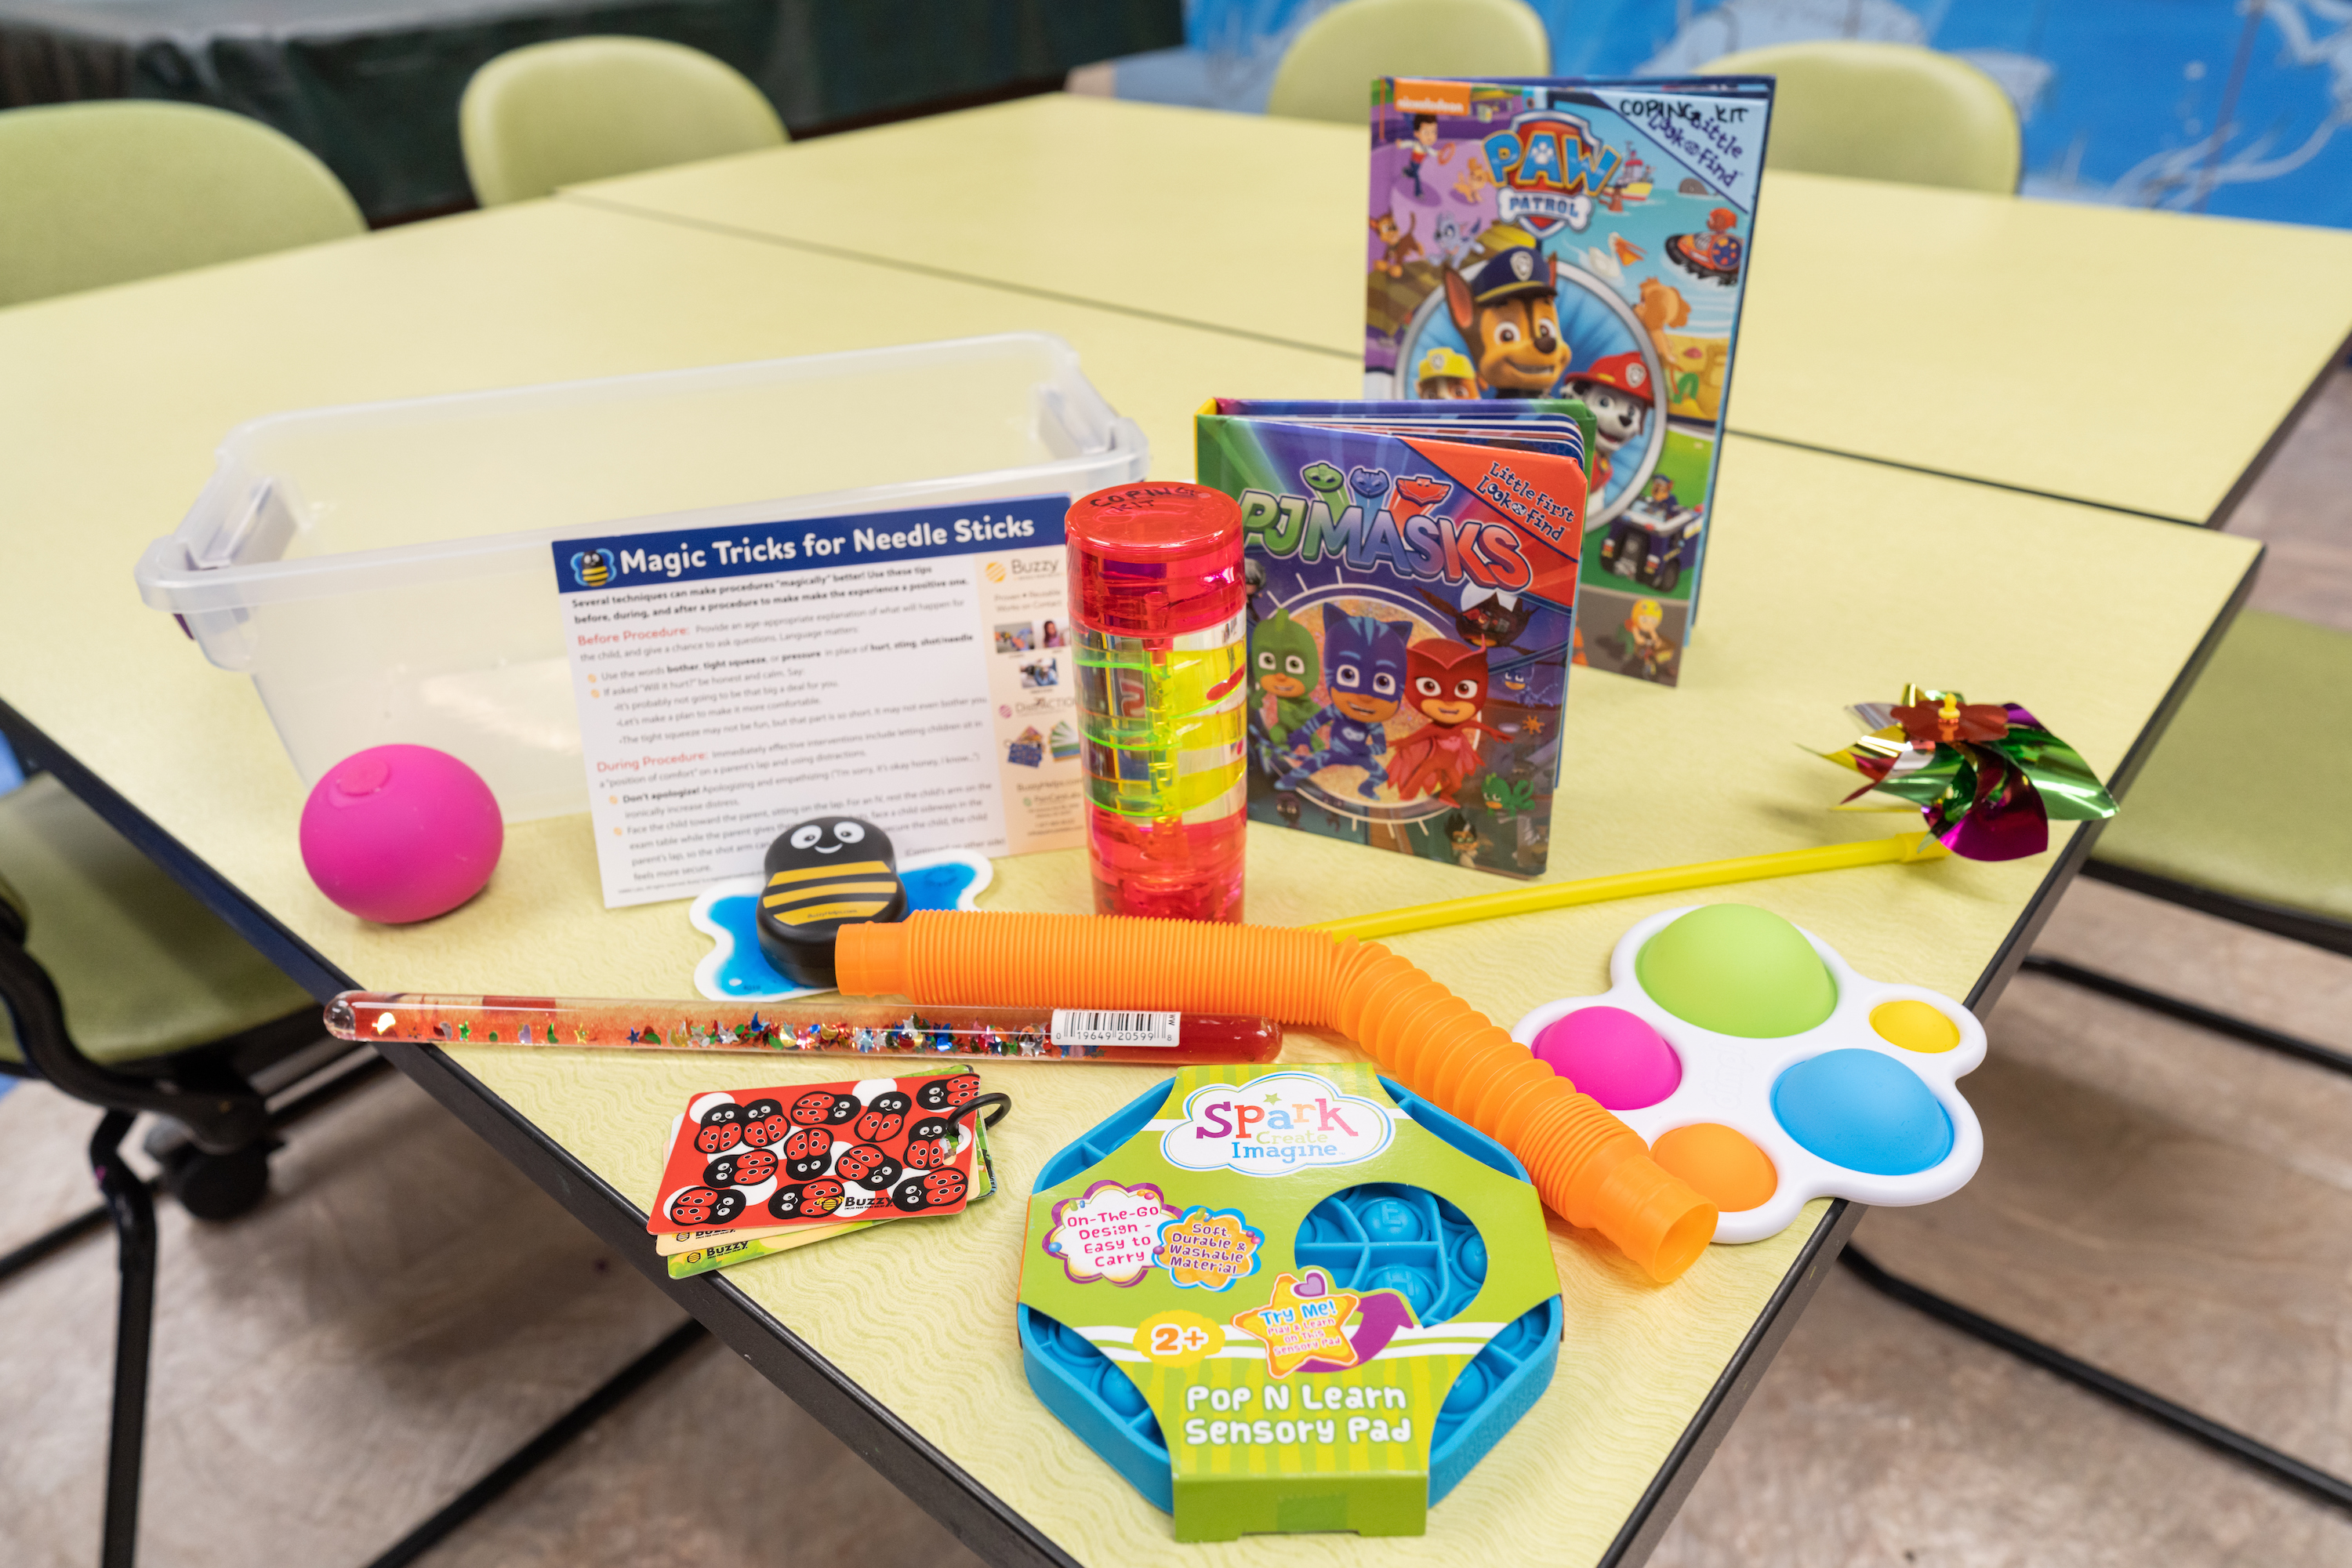 The coping kits for pediatric patients